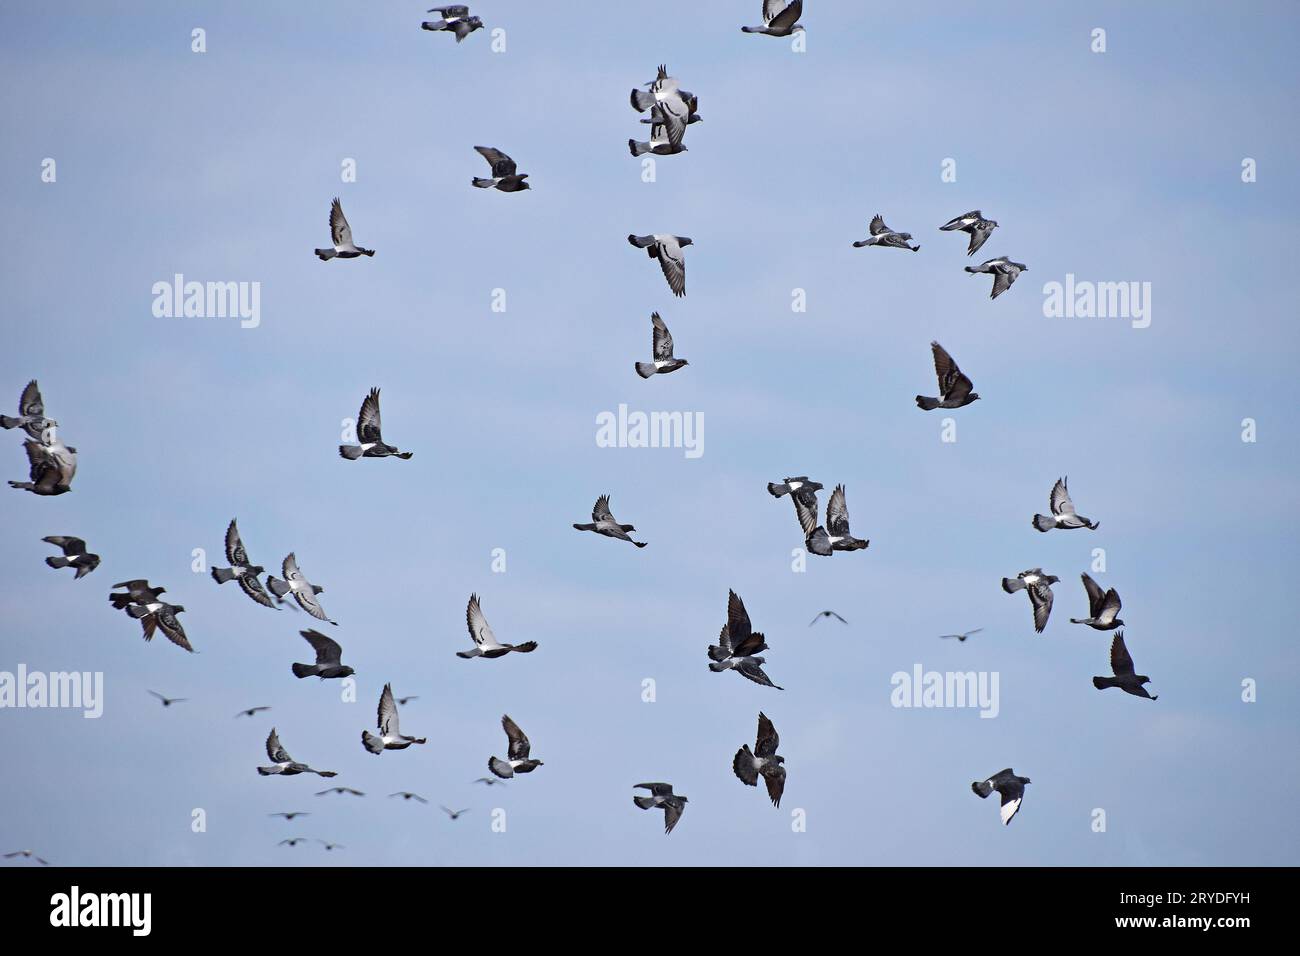 Flock of many pigeon birds in blue sky Stock Photo